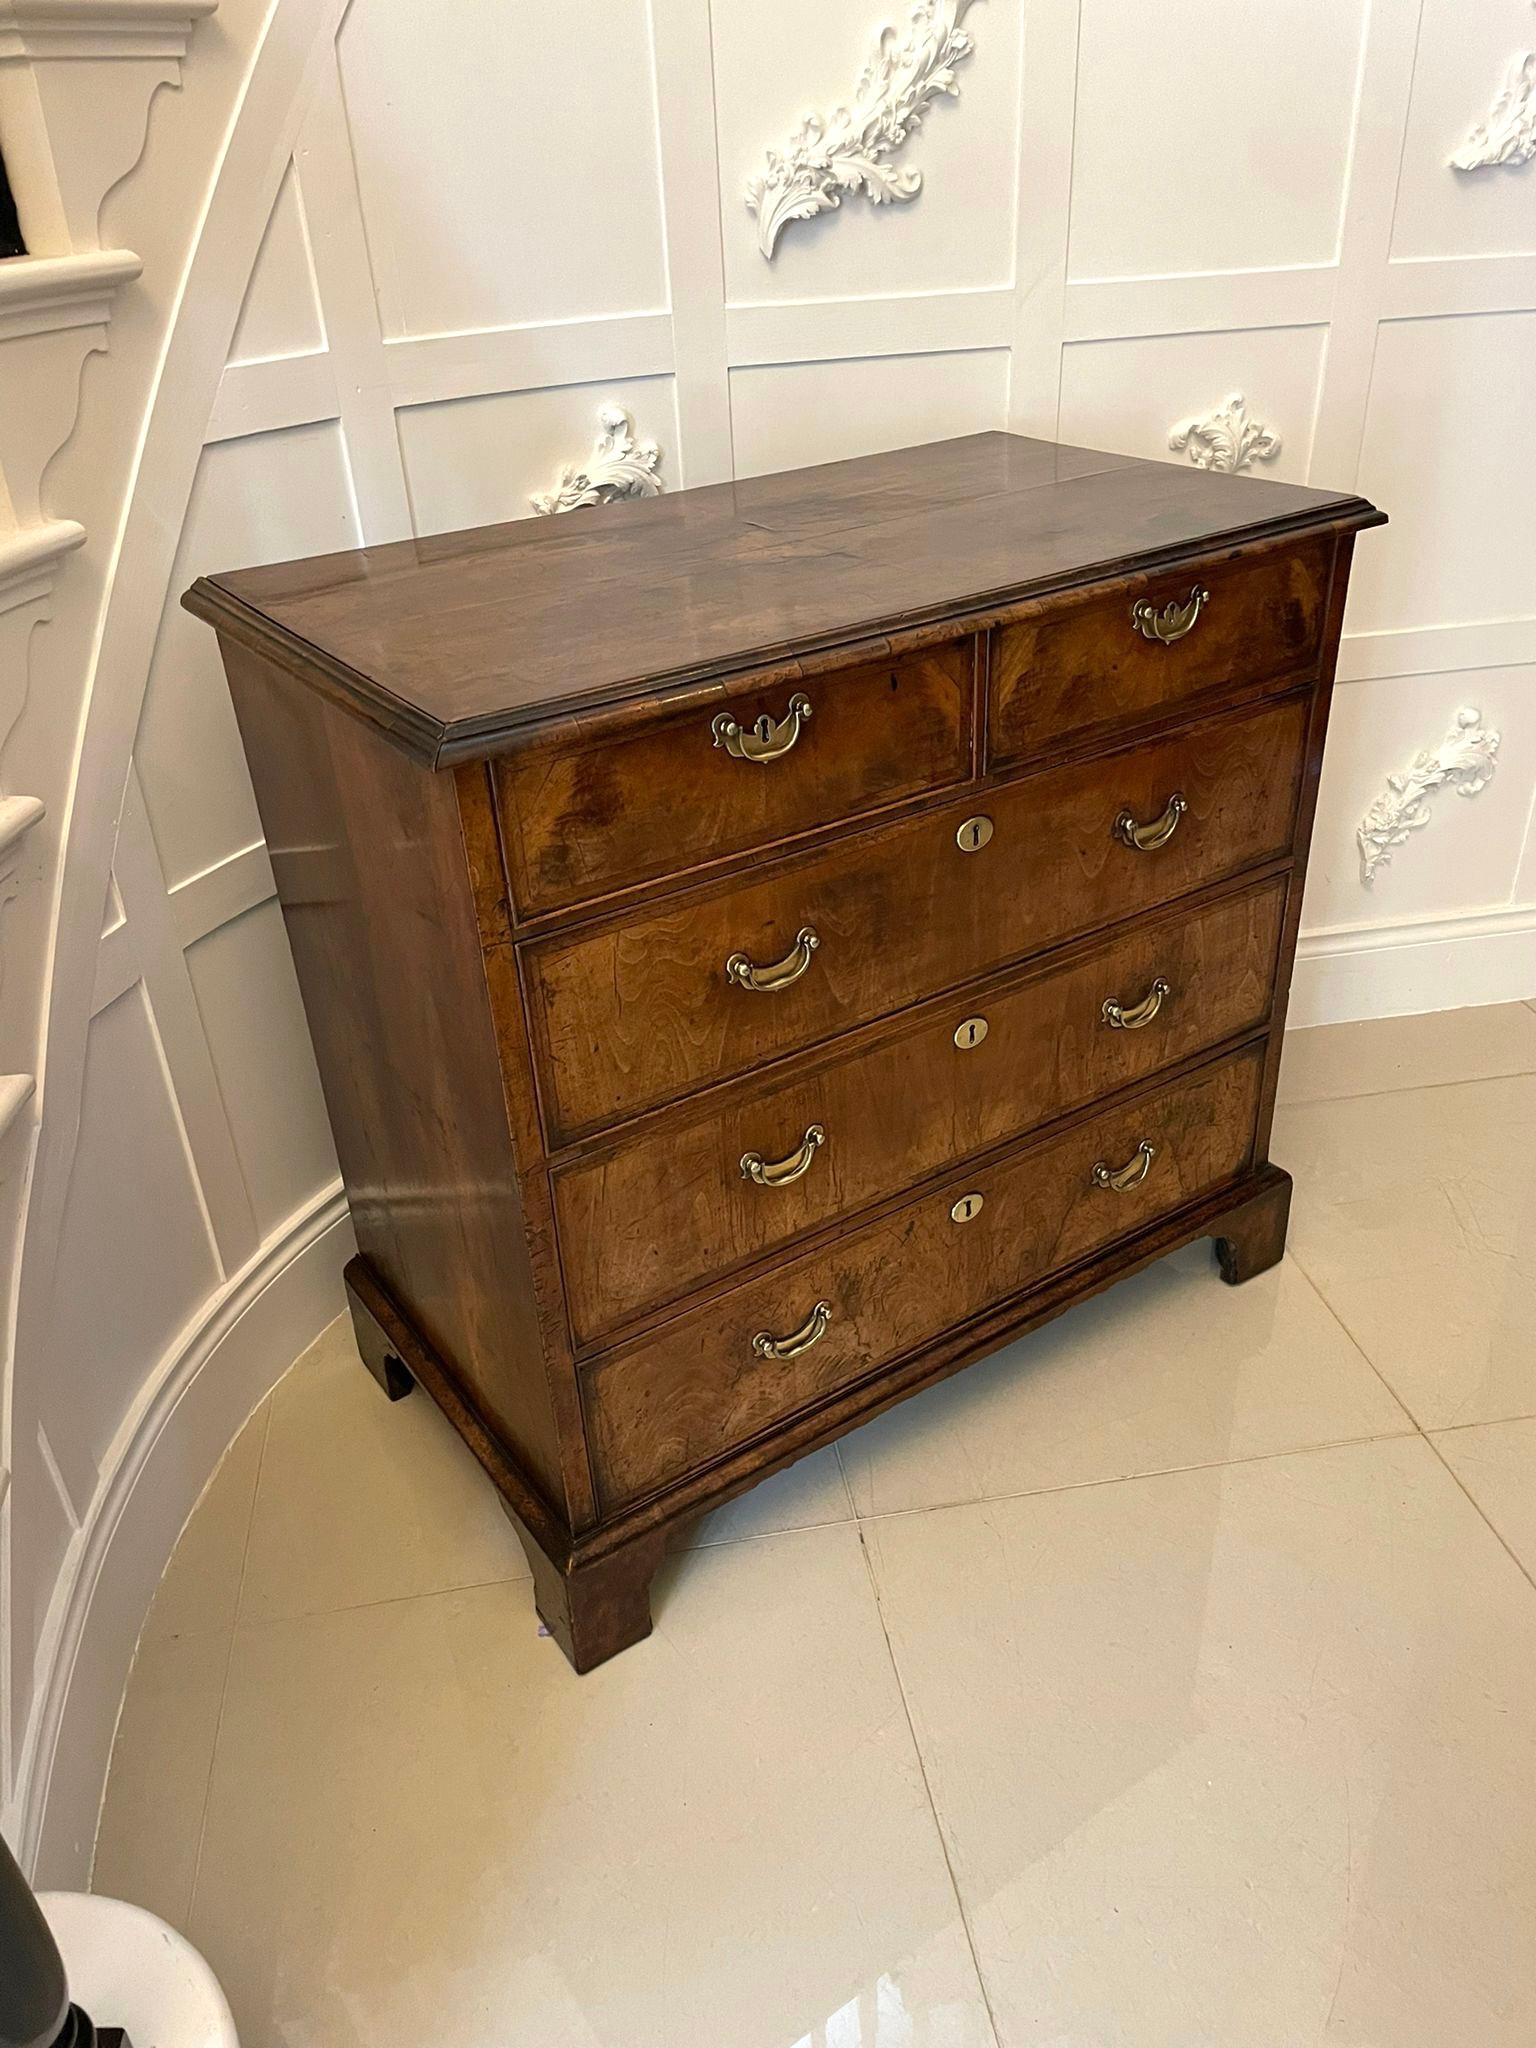 Outstanding original George I antique quality figured walnut chest of drawers having a quality quarter figured walnut veneered top with herringbone inlay and a moulded edge above two short and three long figured walnut cockbeeded drawers with